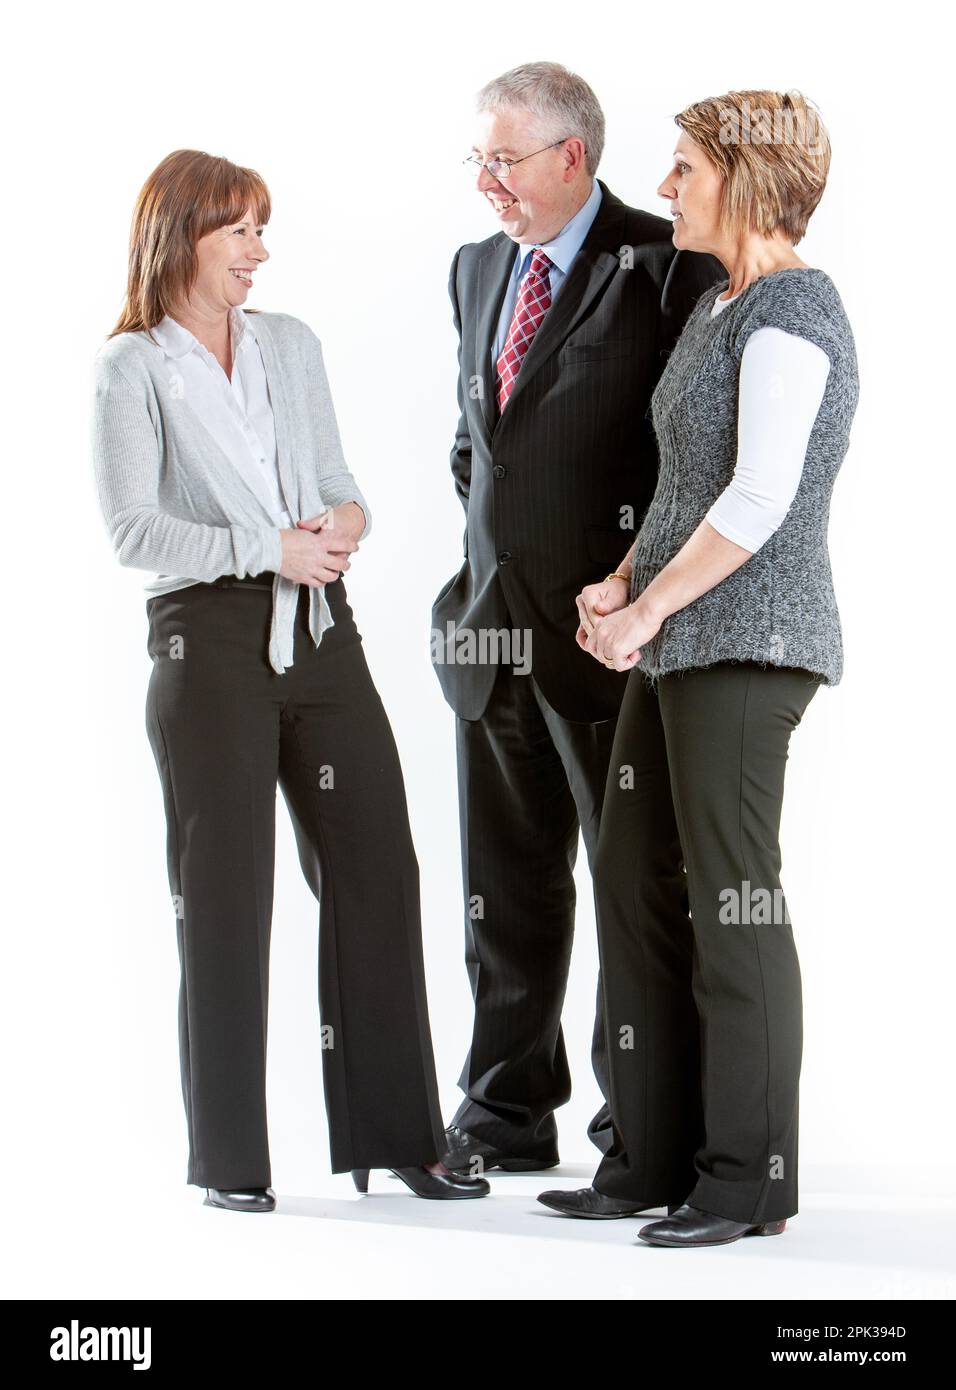 Business Colleagues: Candid Professionals. Full length portrait of a friendly business team isolated on white. From a series of related images. Stock Photo